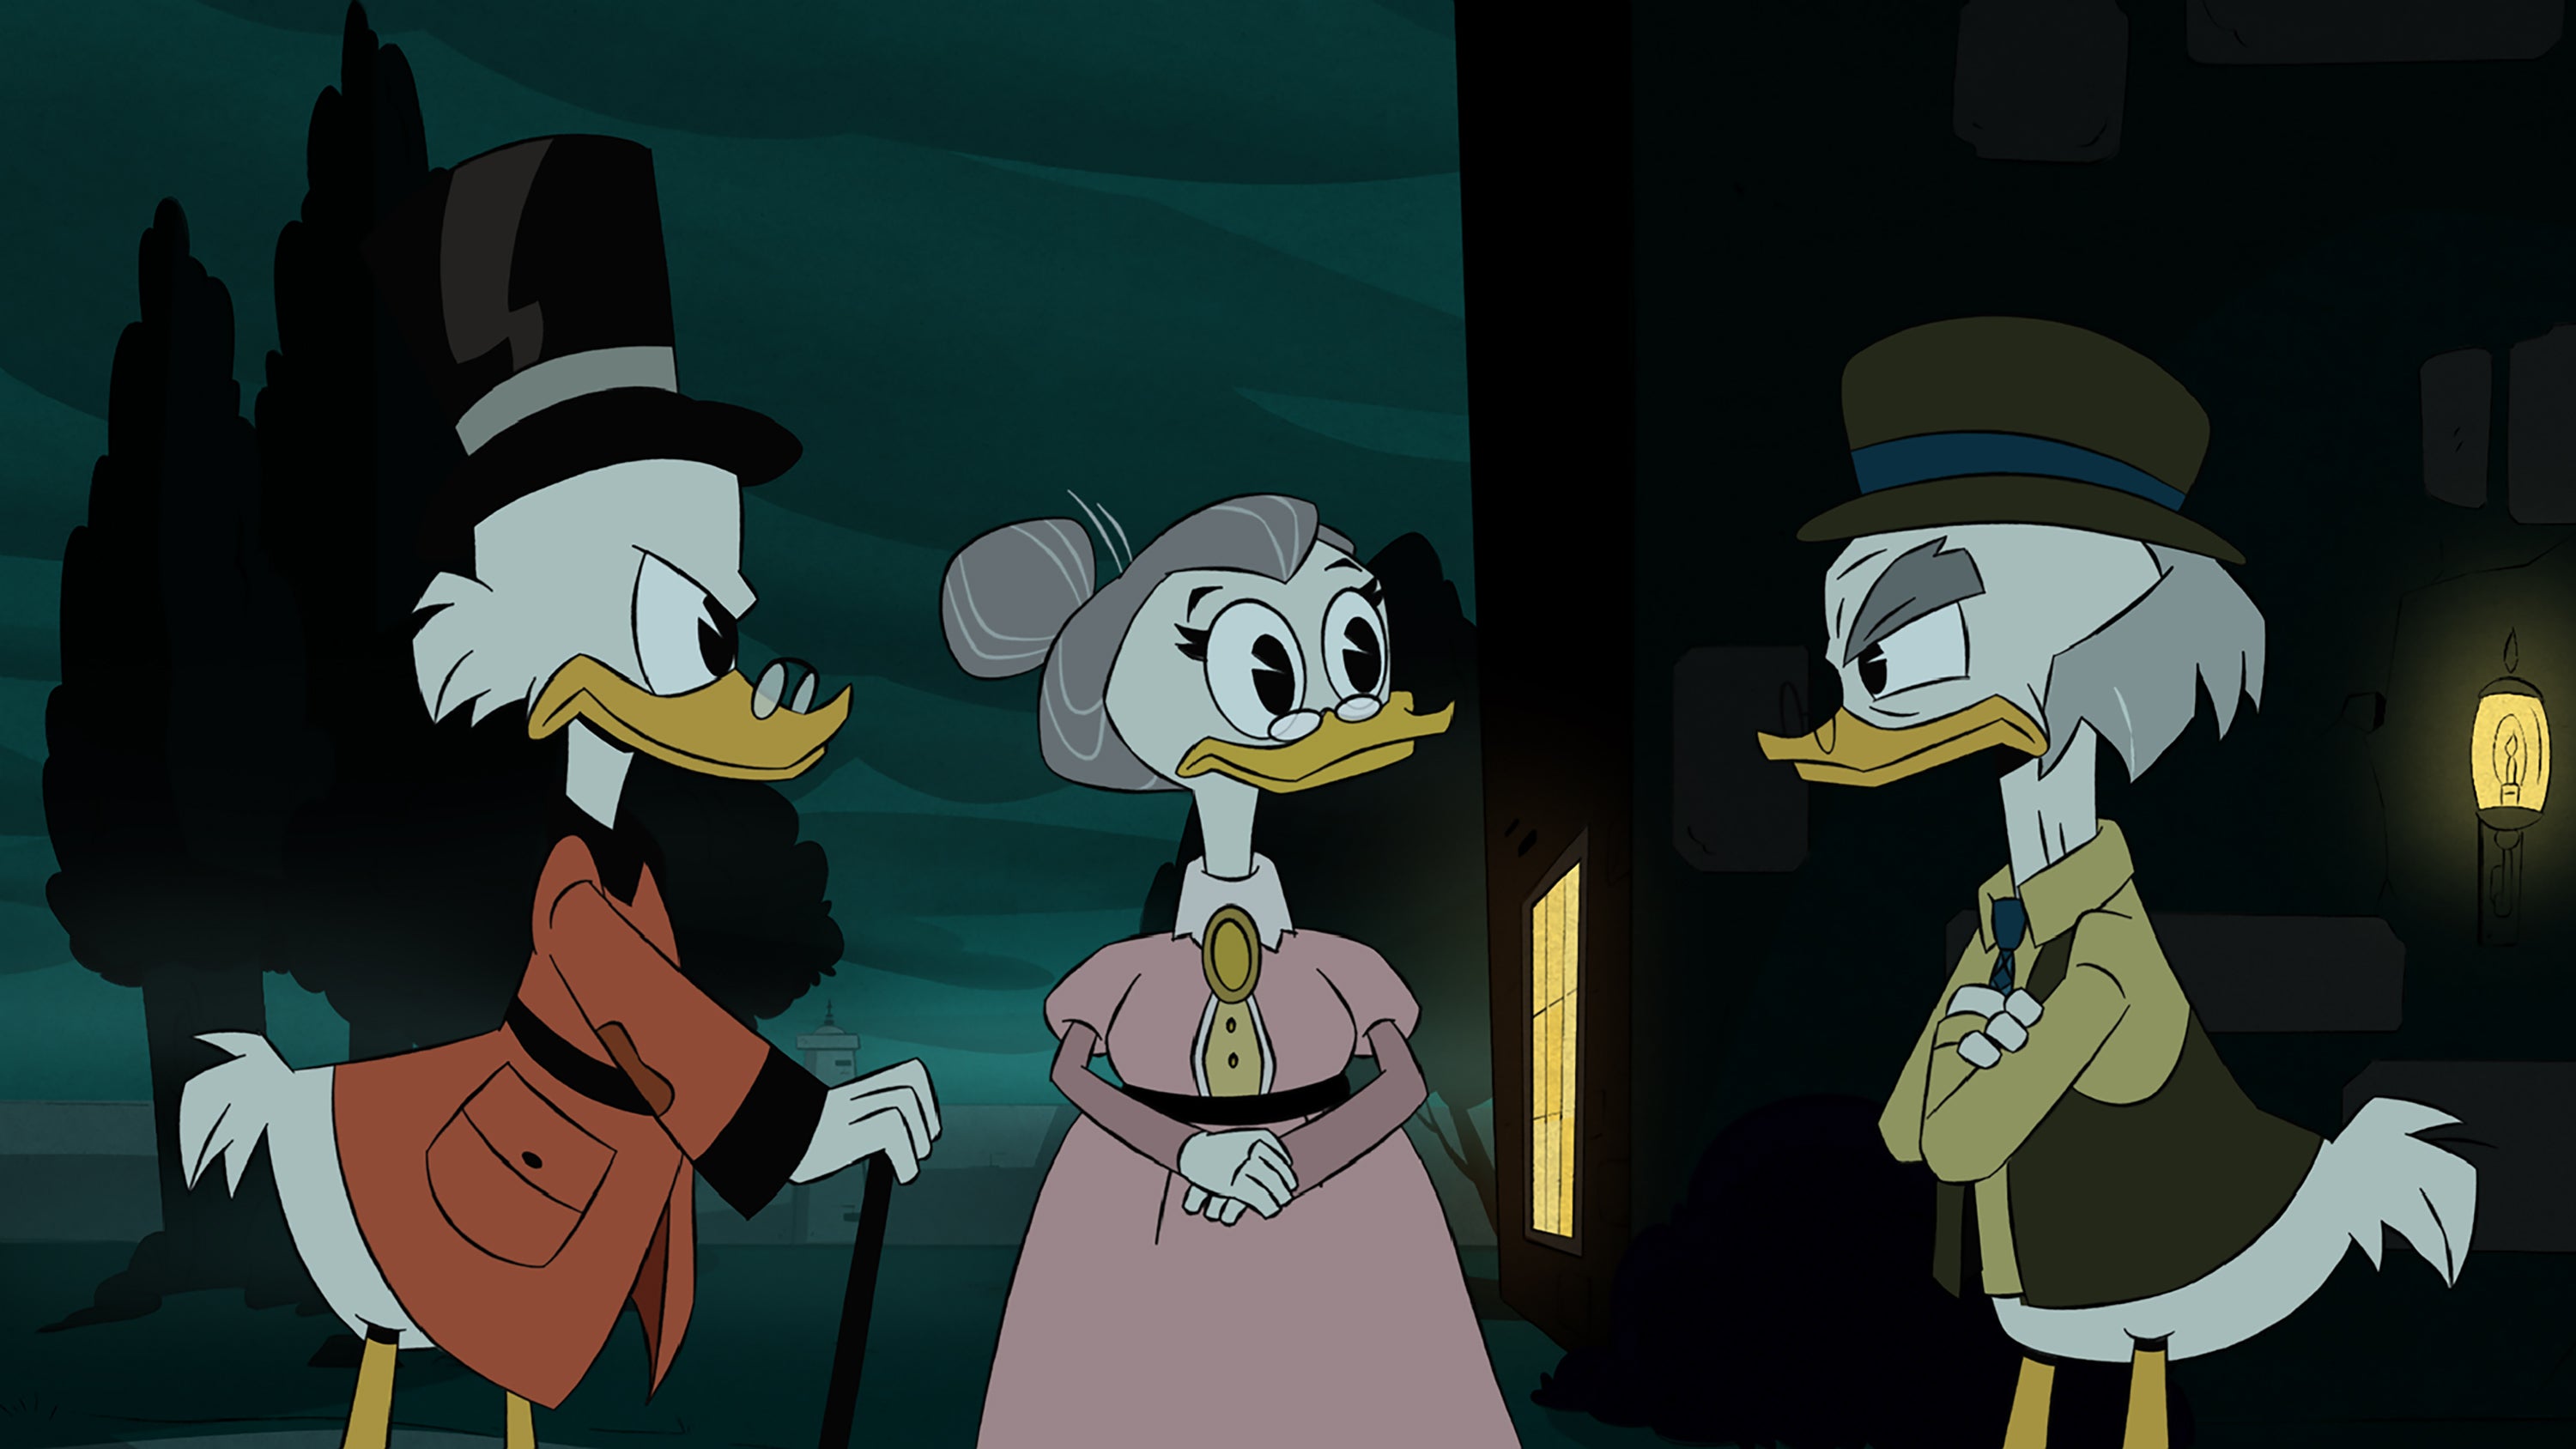 Revelations Abound As DuckTales Discovers The Truths That Lie Beneath.